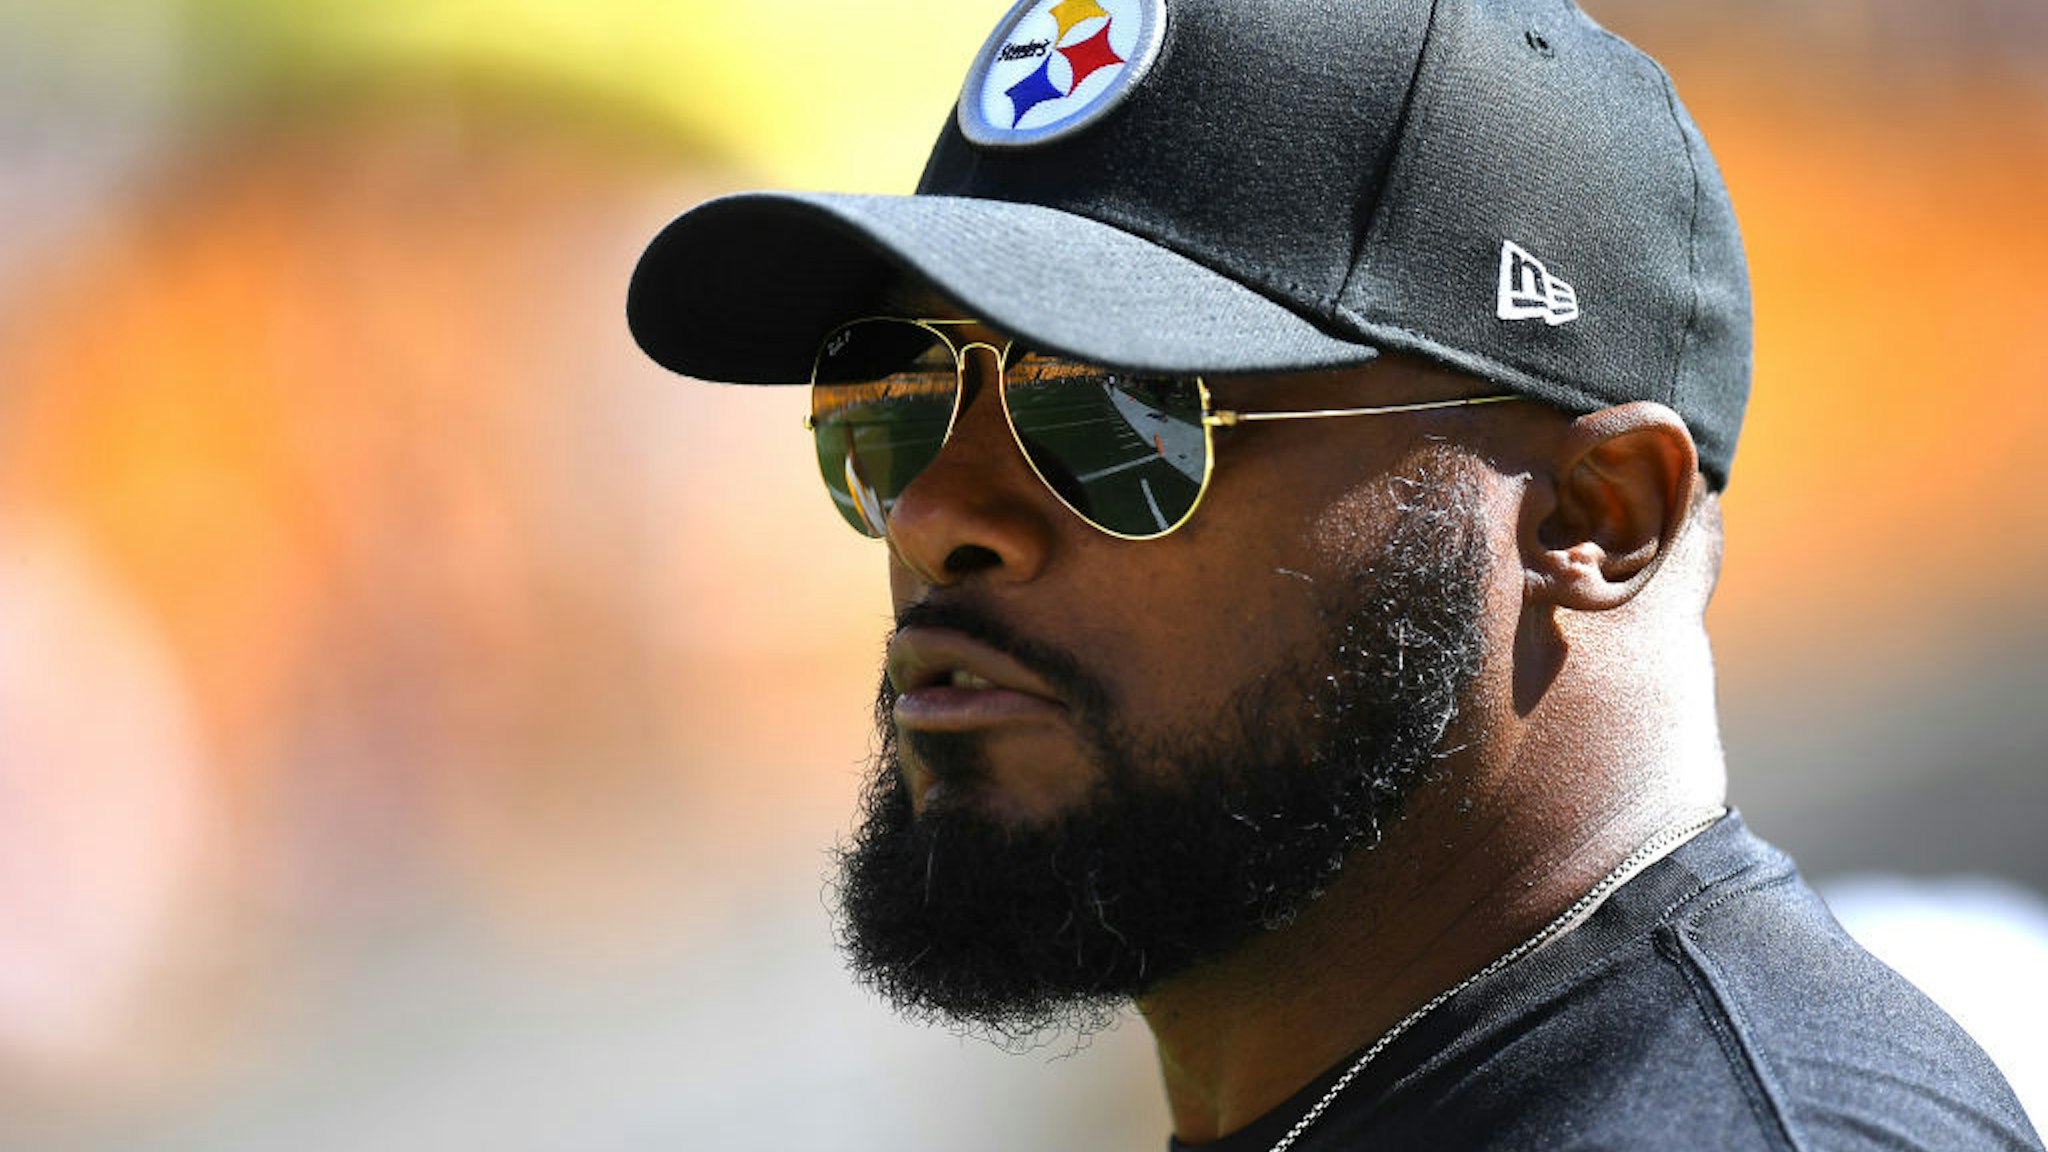 PITTSBURGH, PENNSYLVANIA - SEPTEMBER 26: Head coach Mike Tomlin of the Pittsburgh Steelers on the field before the game against the Cincinnati Bengals at Heinz Field on September 26, 2021 in Pittsburgh, Pennsylvania. (Photo by Joe Sargent/Getty Images)